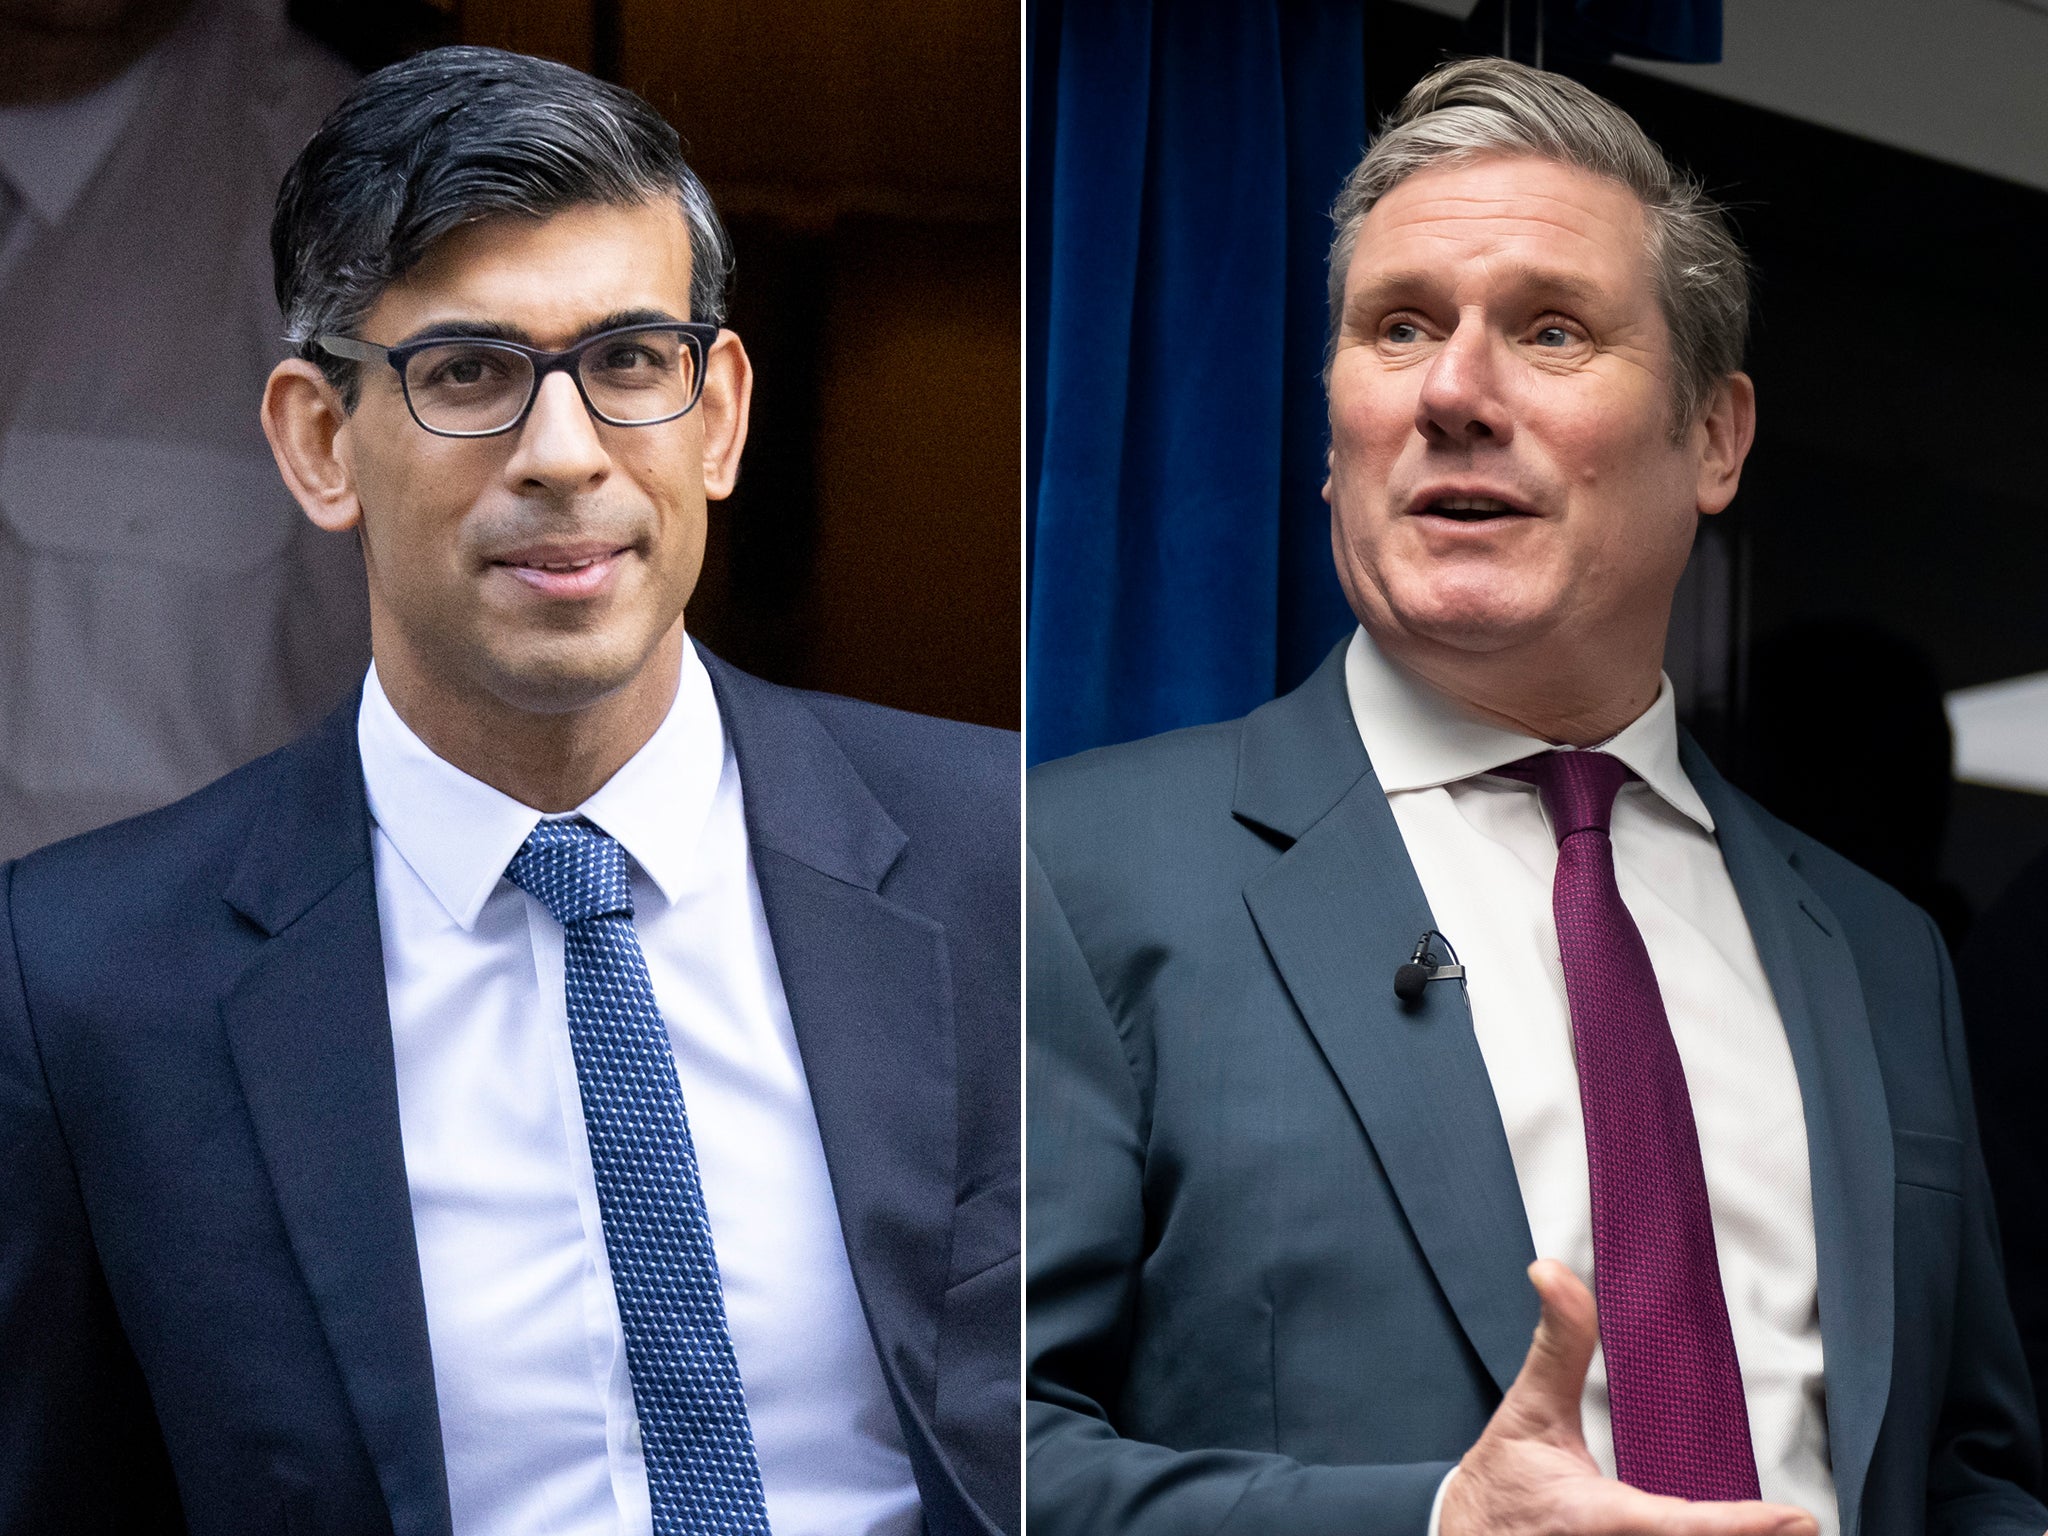 Rishi Sunak faces wipeout at hands of Keir Starmer’s Labour